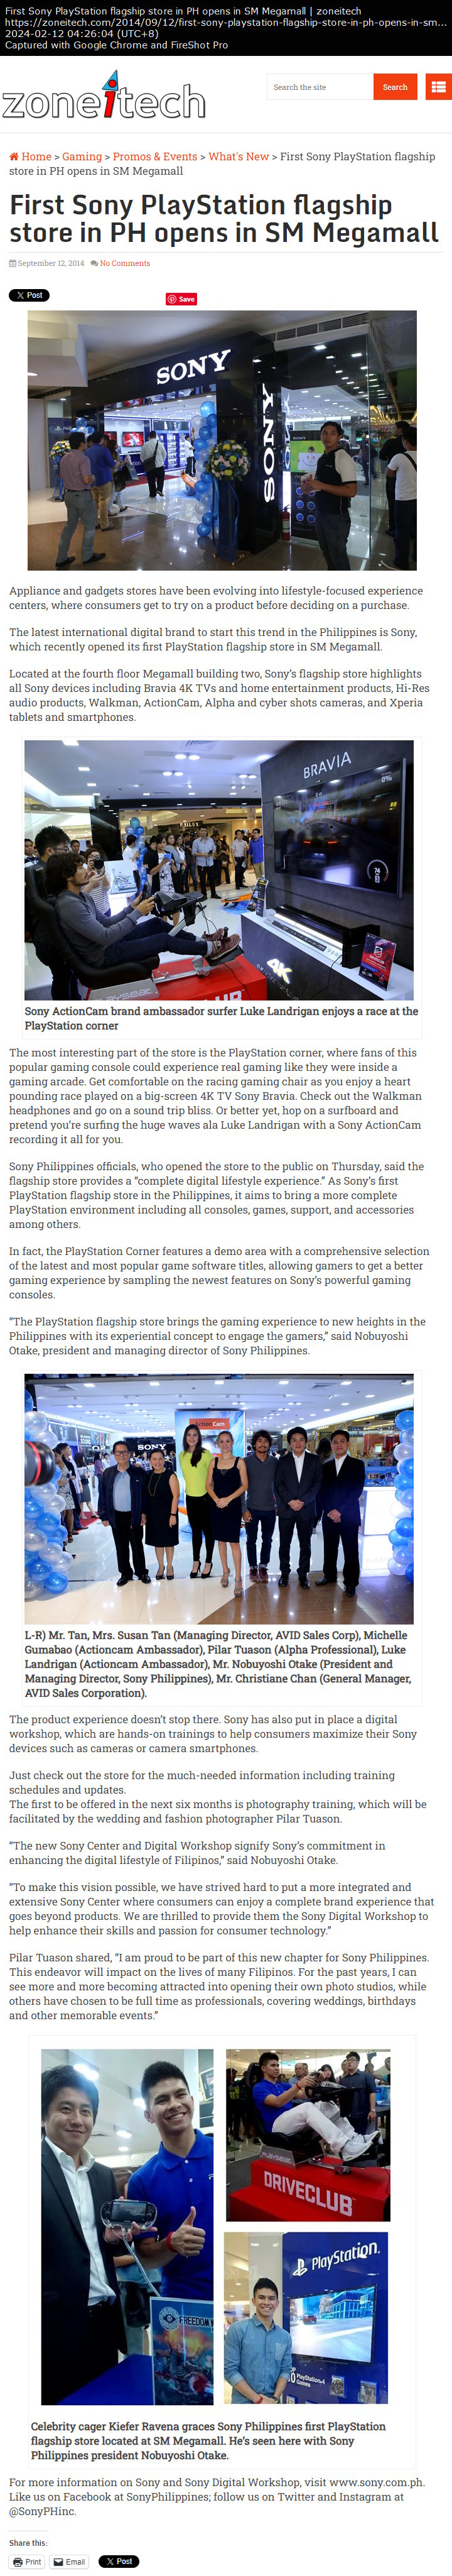 First Sony PlayStation flagship store in PH opens in SM Megamall